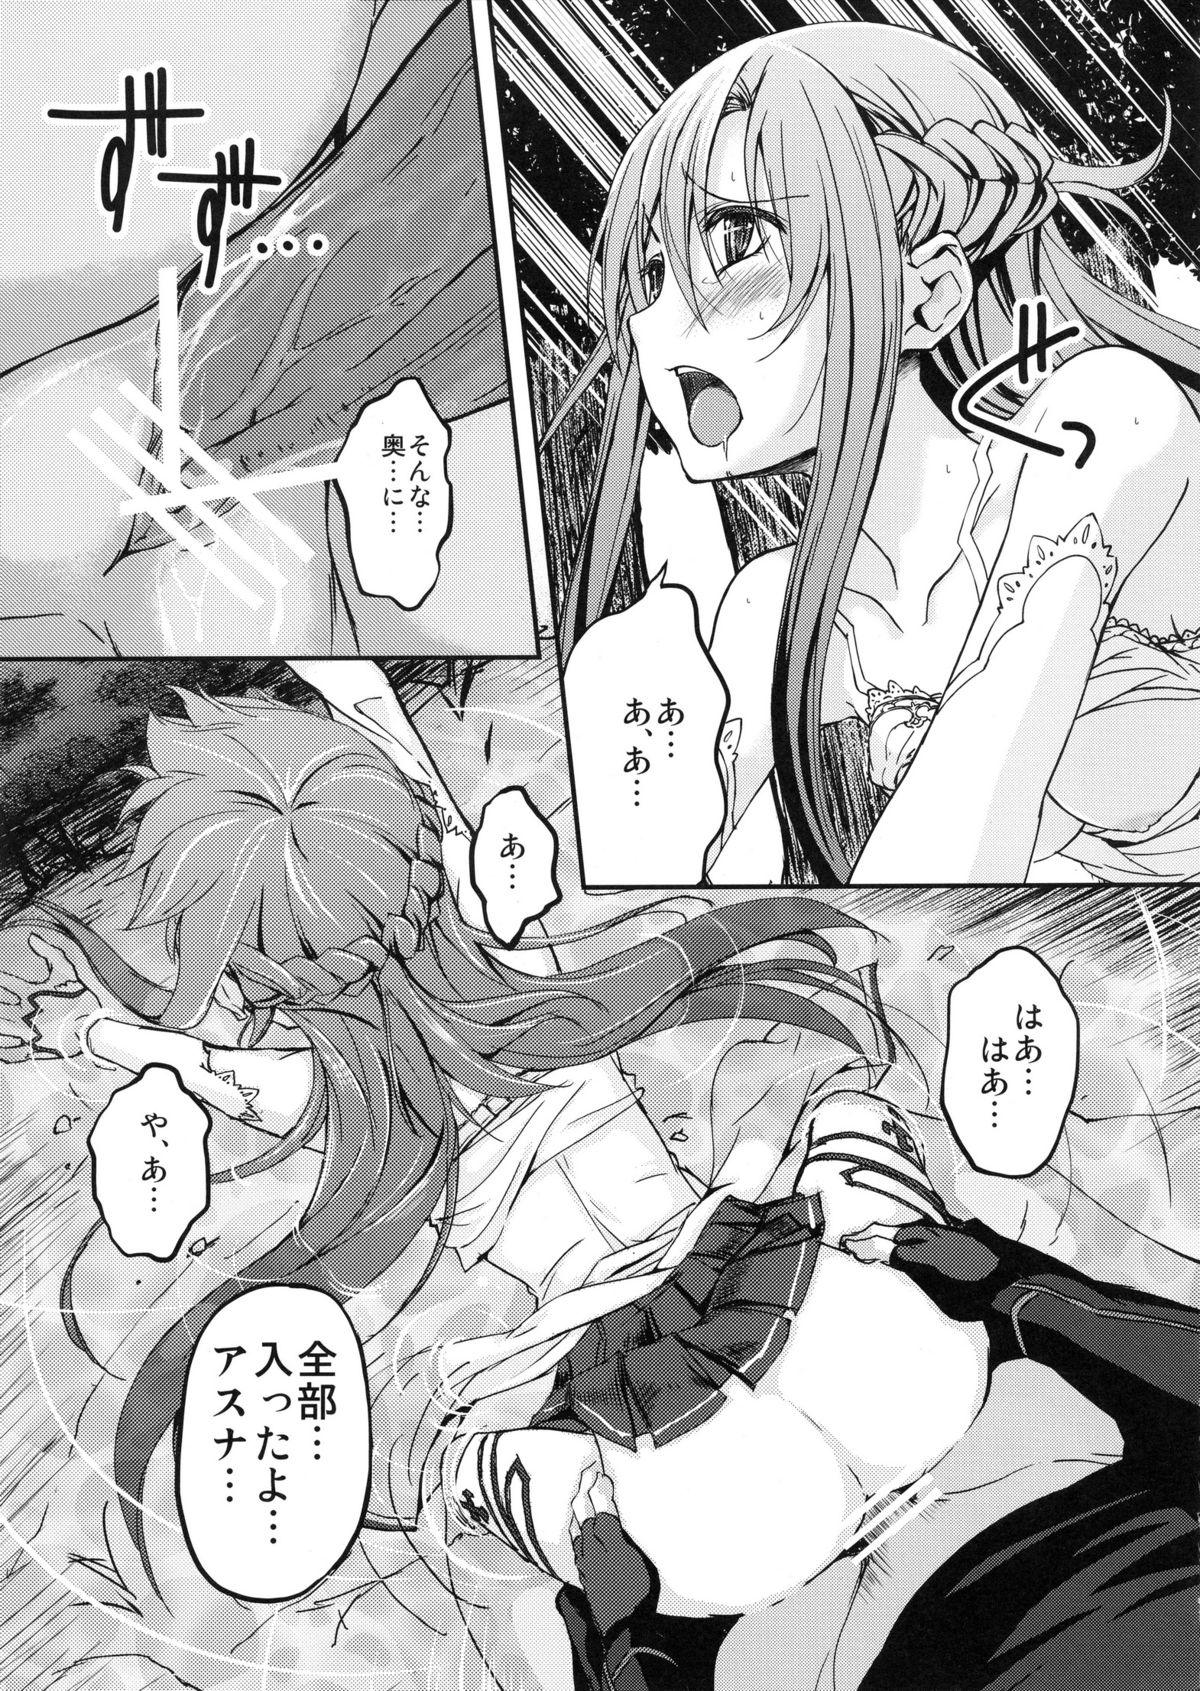 Dominate Marriage Experience - Sword art online Sex Massage - Page 8